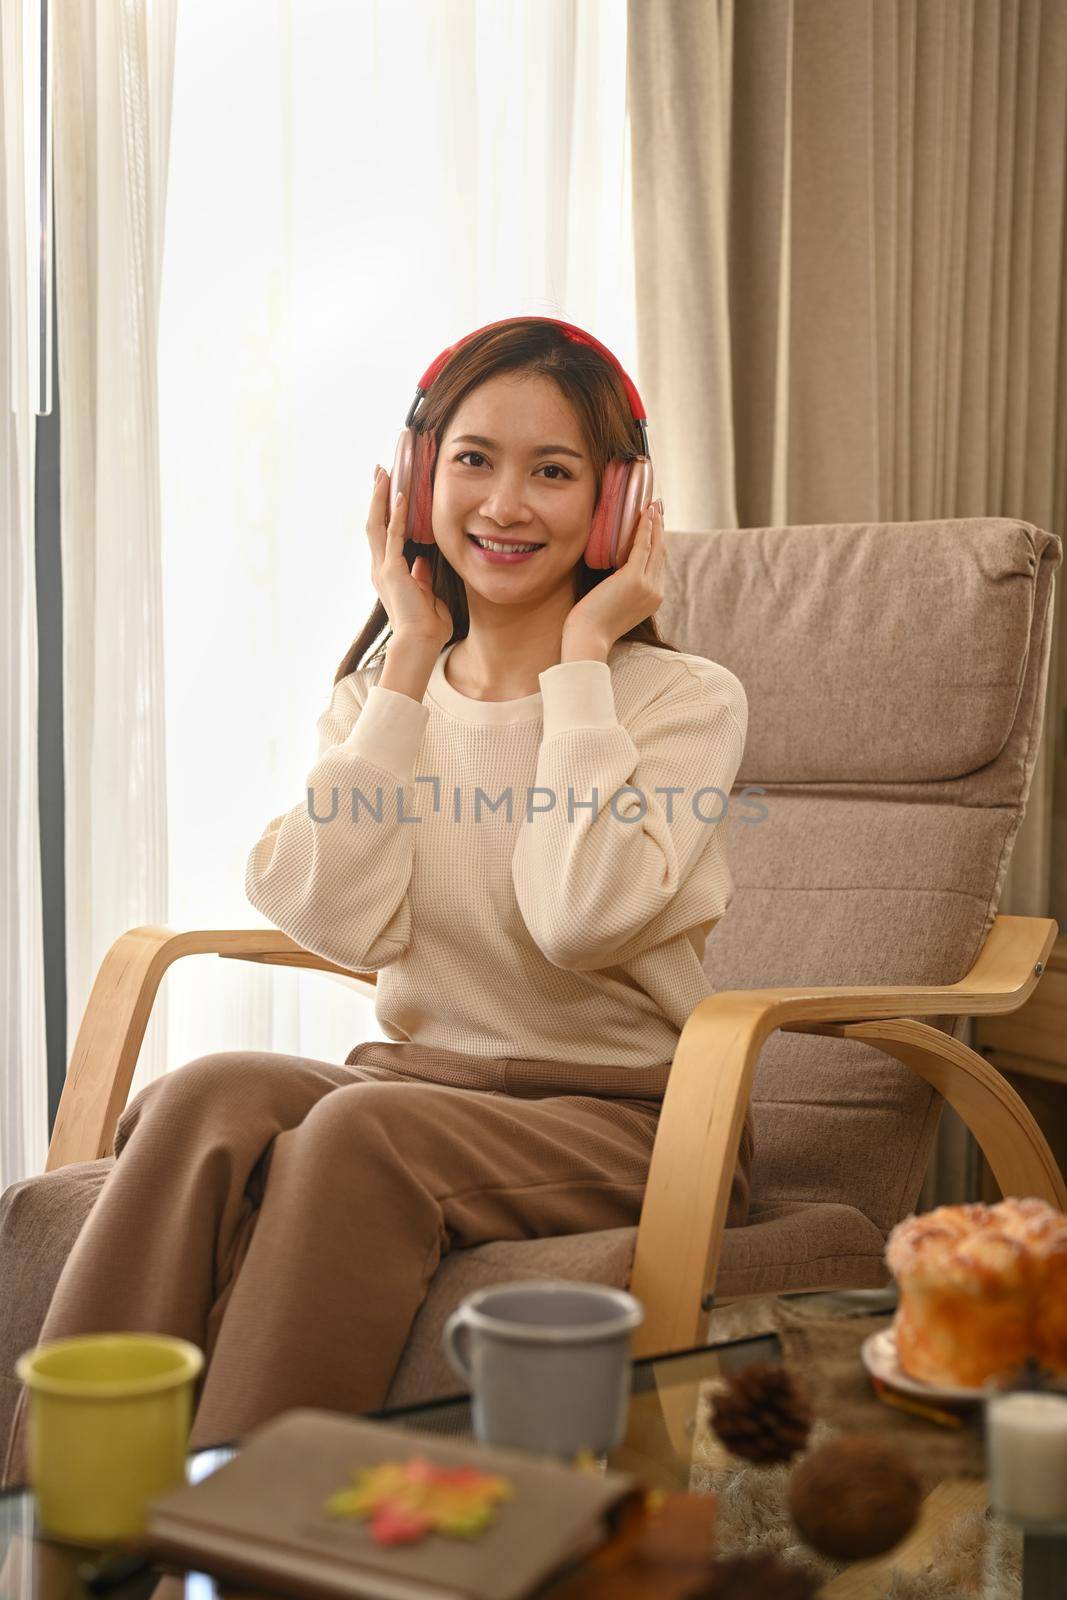 Pleasant woman in warm sweater listening to music on wireless headphone, enjoy stress free peaceful mood in an autumn day.